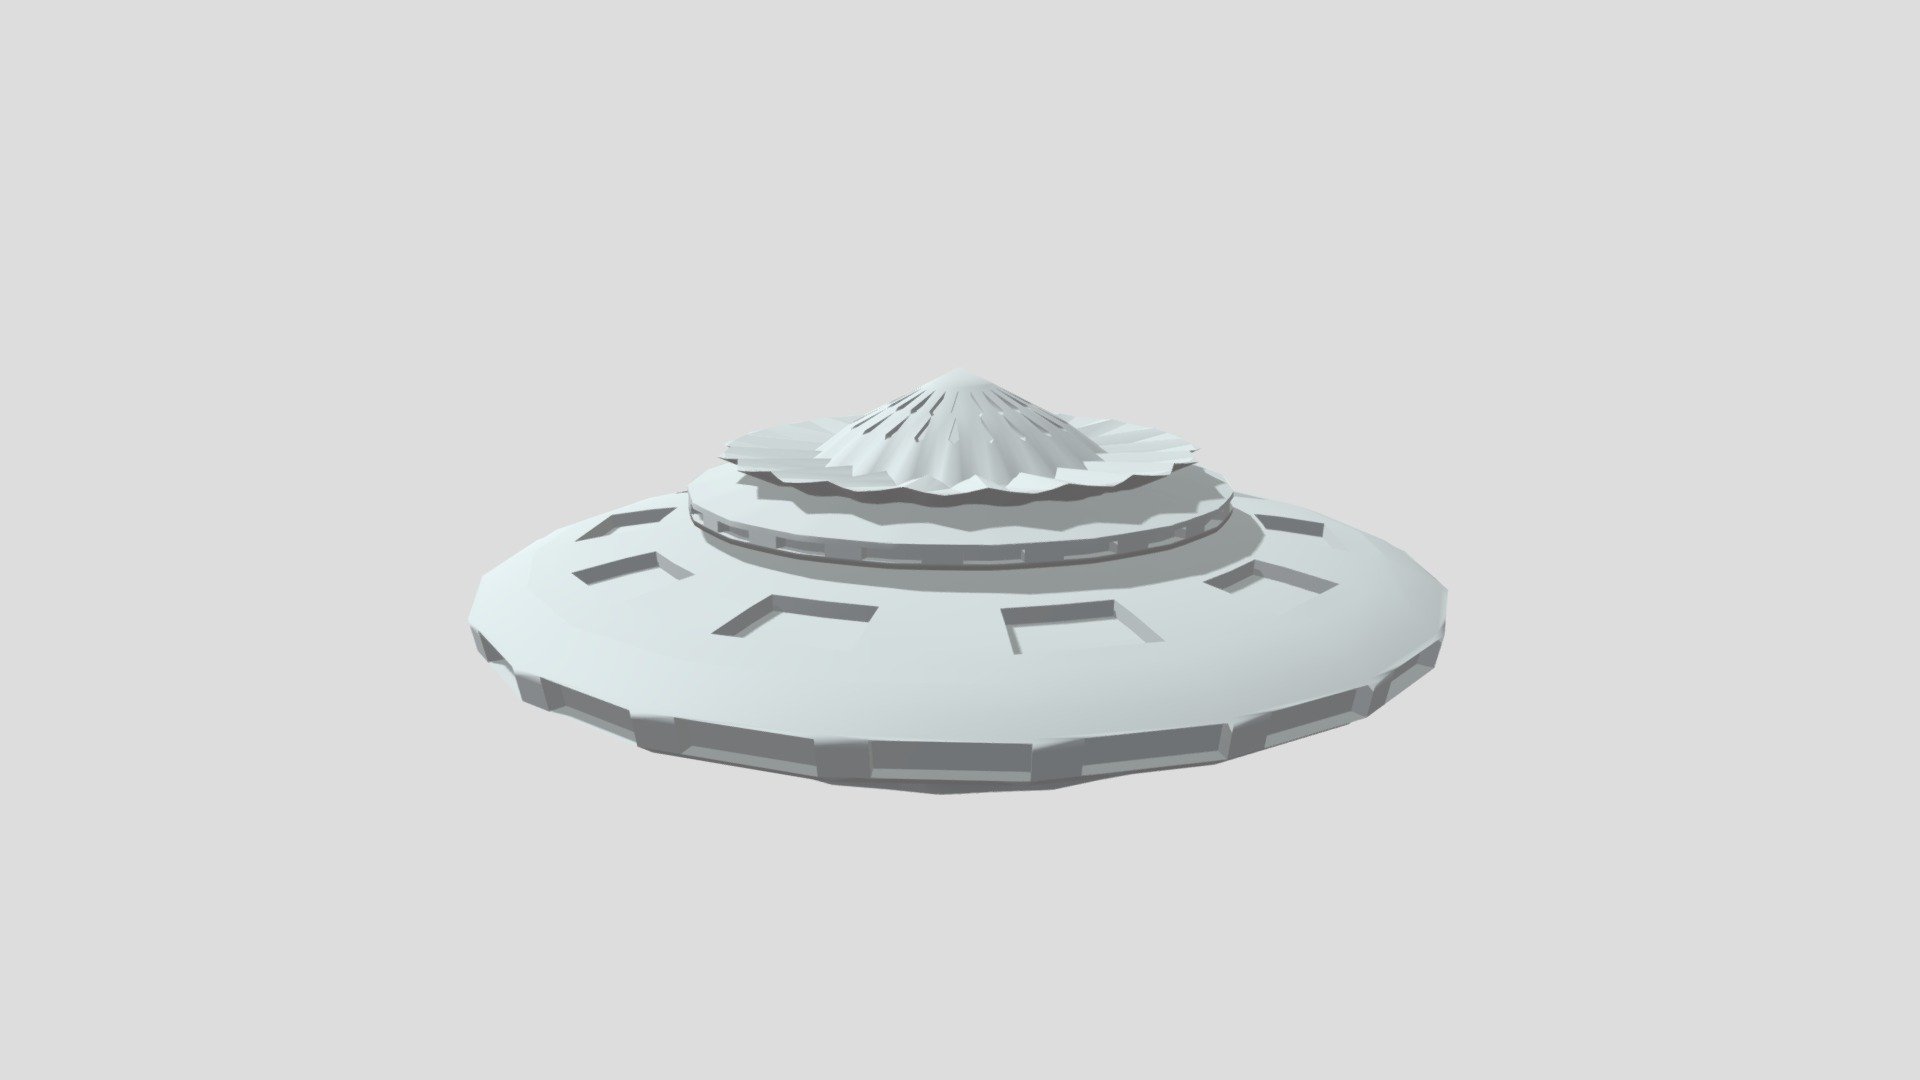 The new design of the UFO.
Im using this in a assessment in college, the rest of you can too if you'd like, just click the download and load it into the 3D software you prefer - My New UFO Design - Download Free 3D model by Calamity Blitz (@sabanic6) 3d model